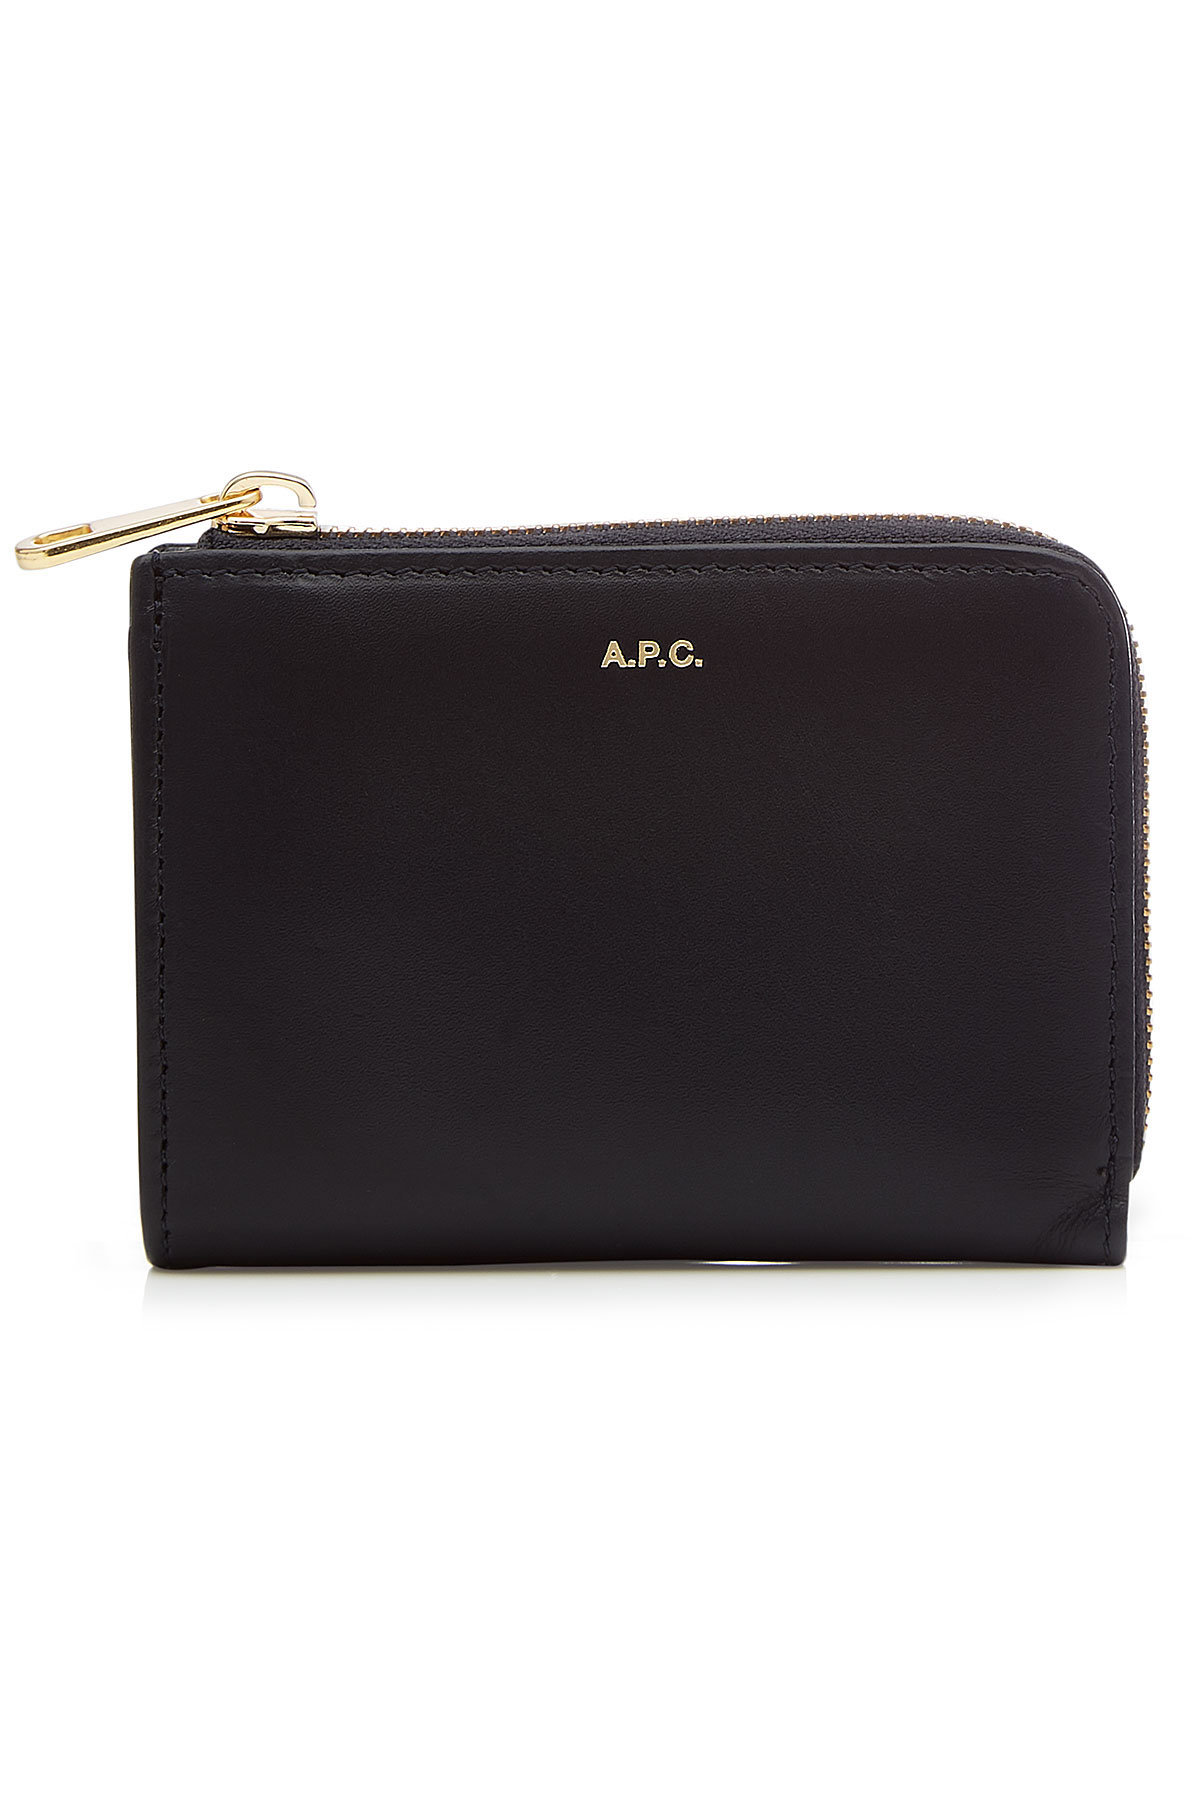 A.P.C. - Zipped Leather Wallet